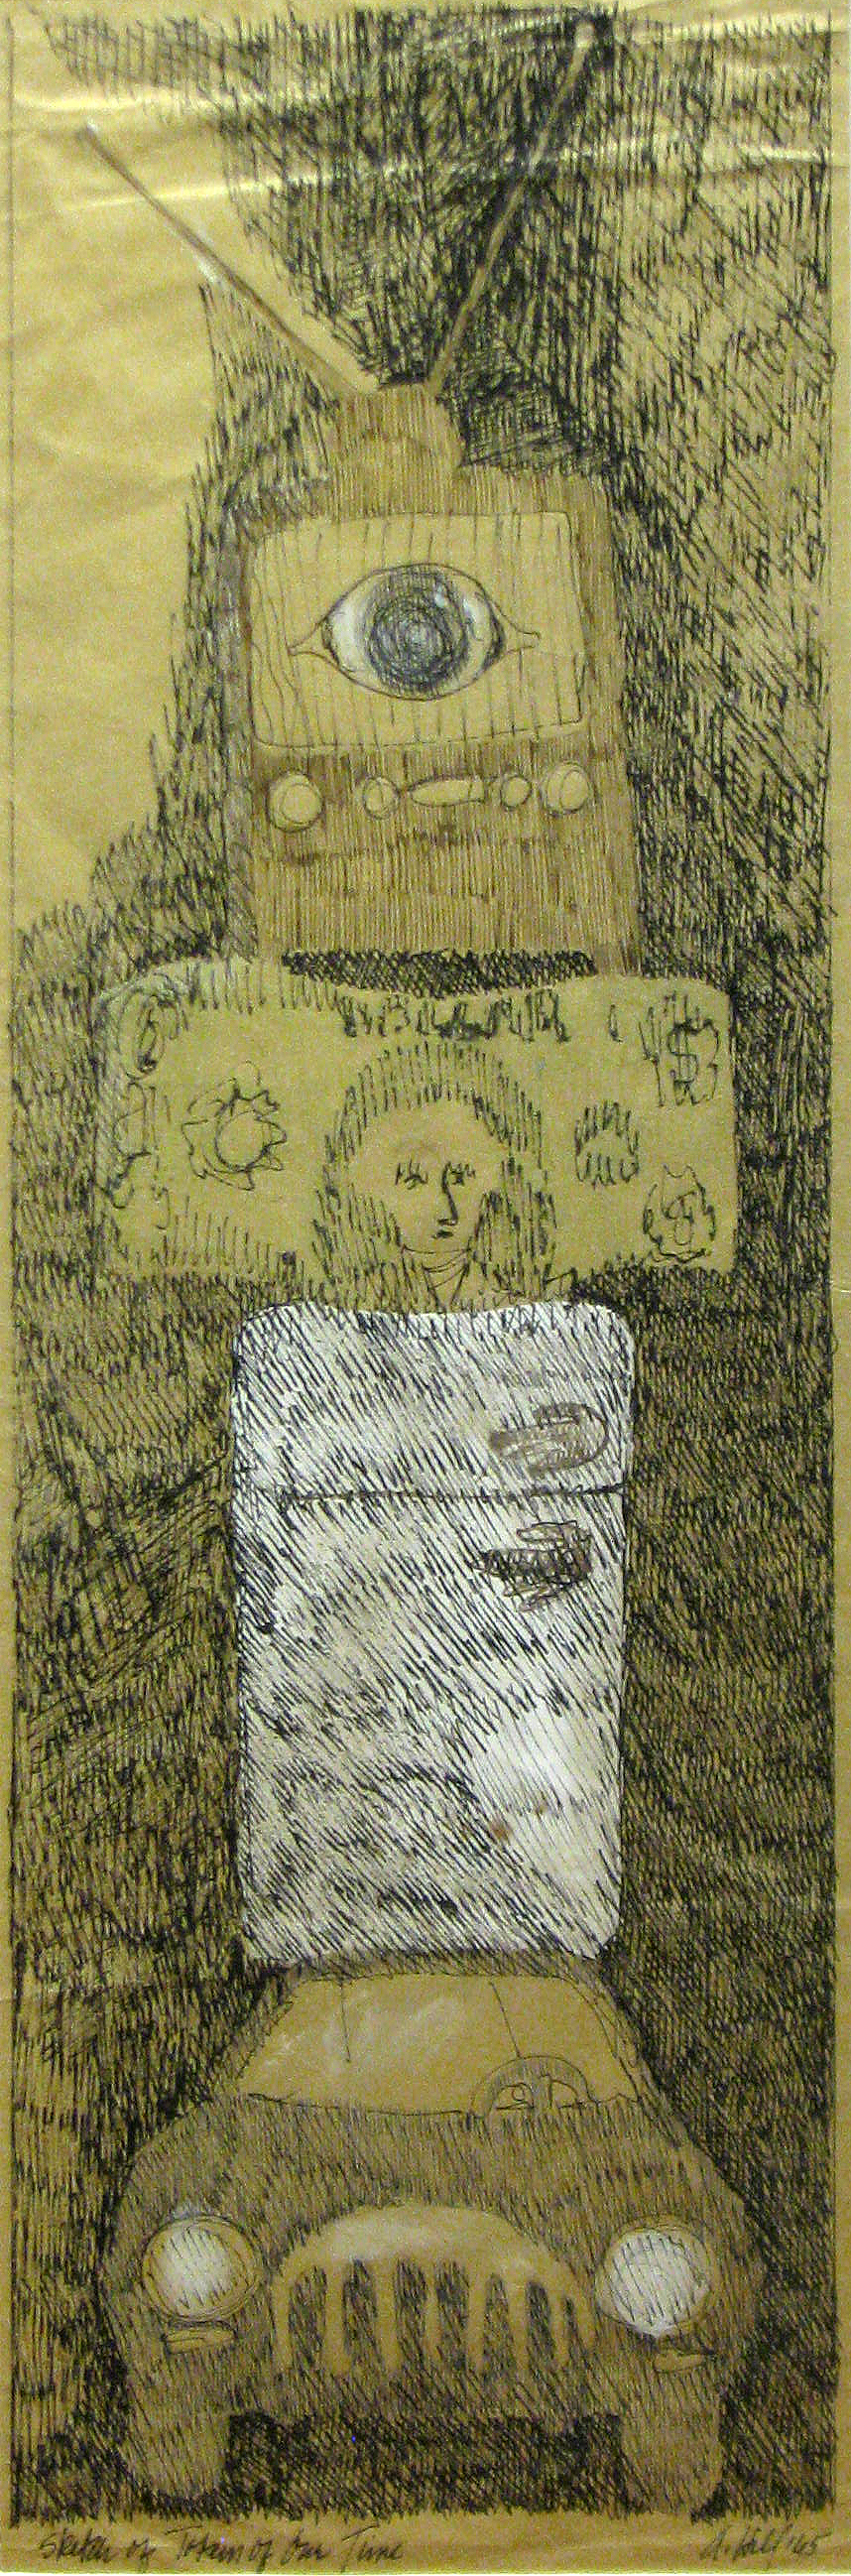 Anne Hill, Sketch Totem of our Time, Ink on Paper, 23 x 8